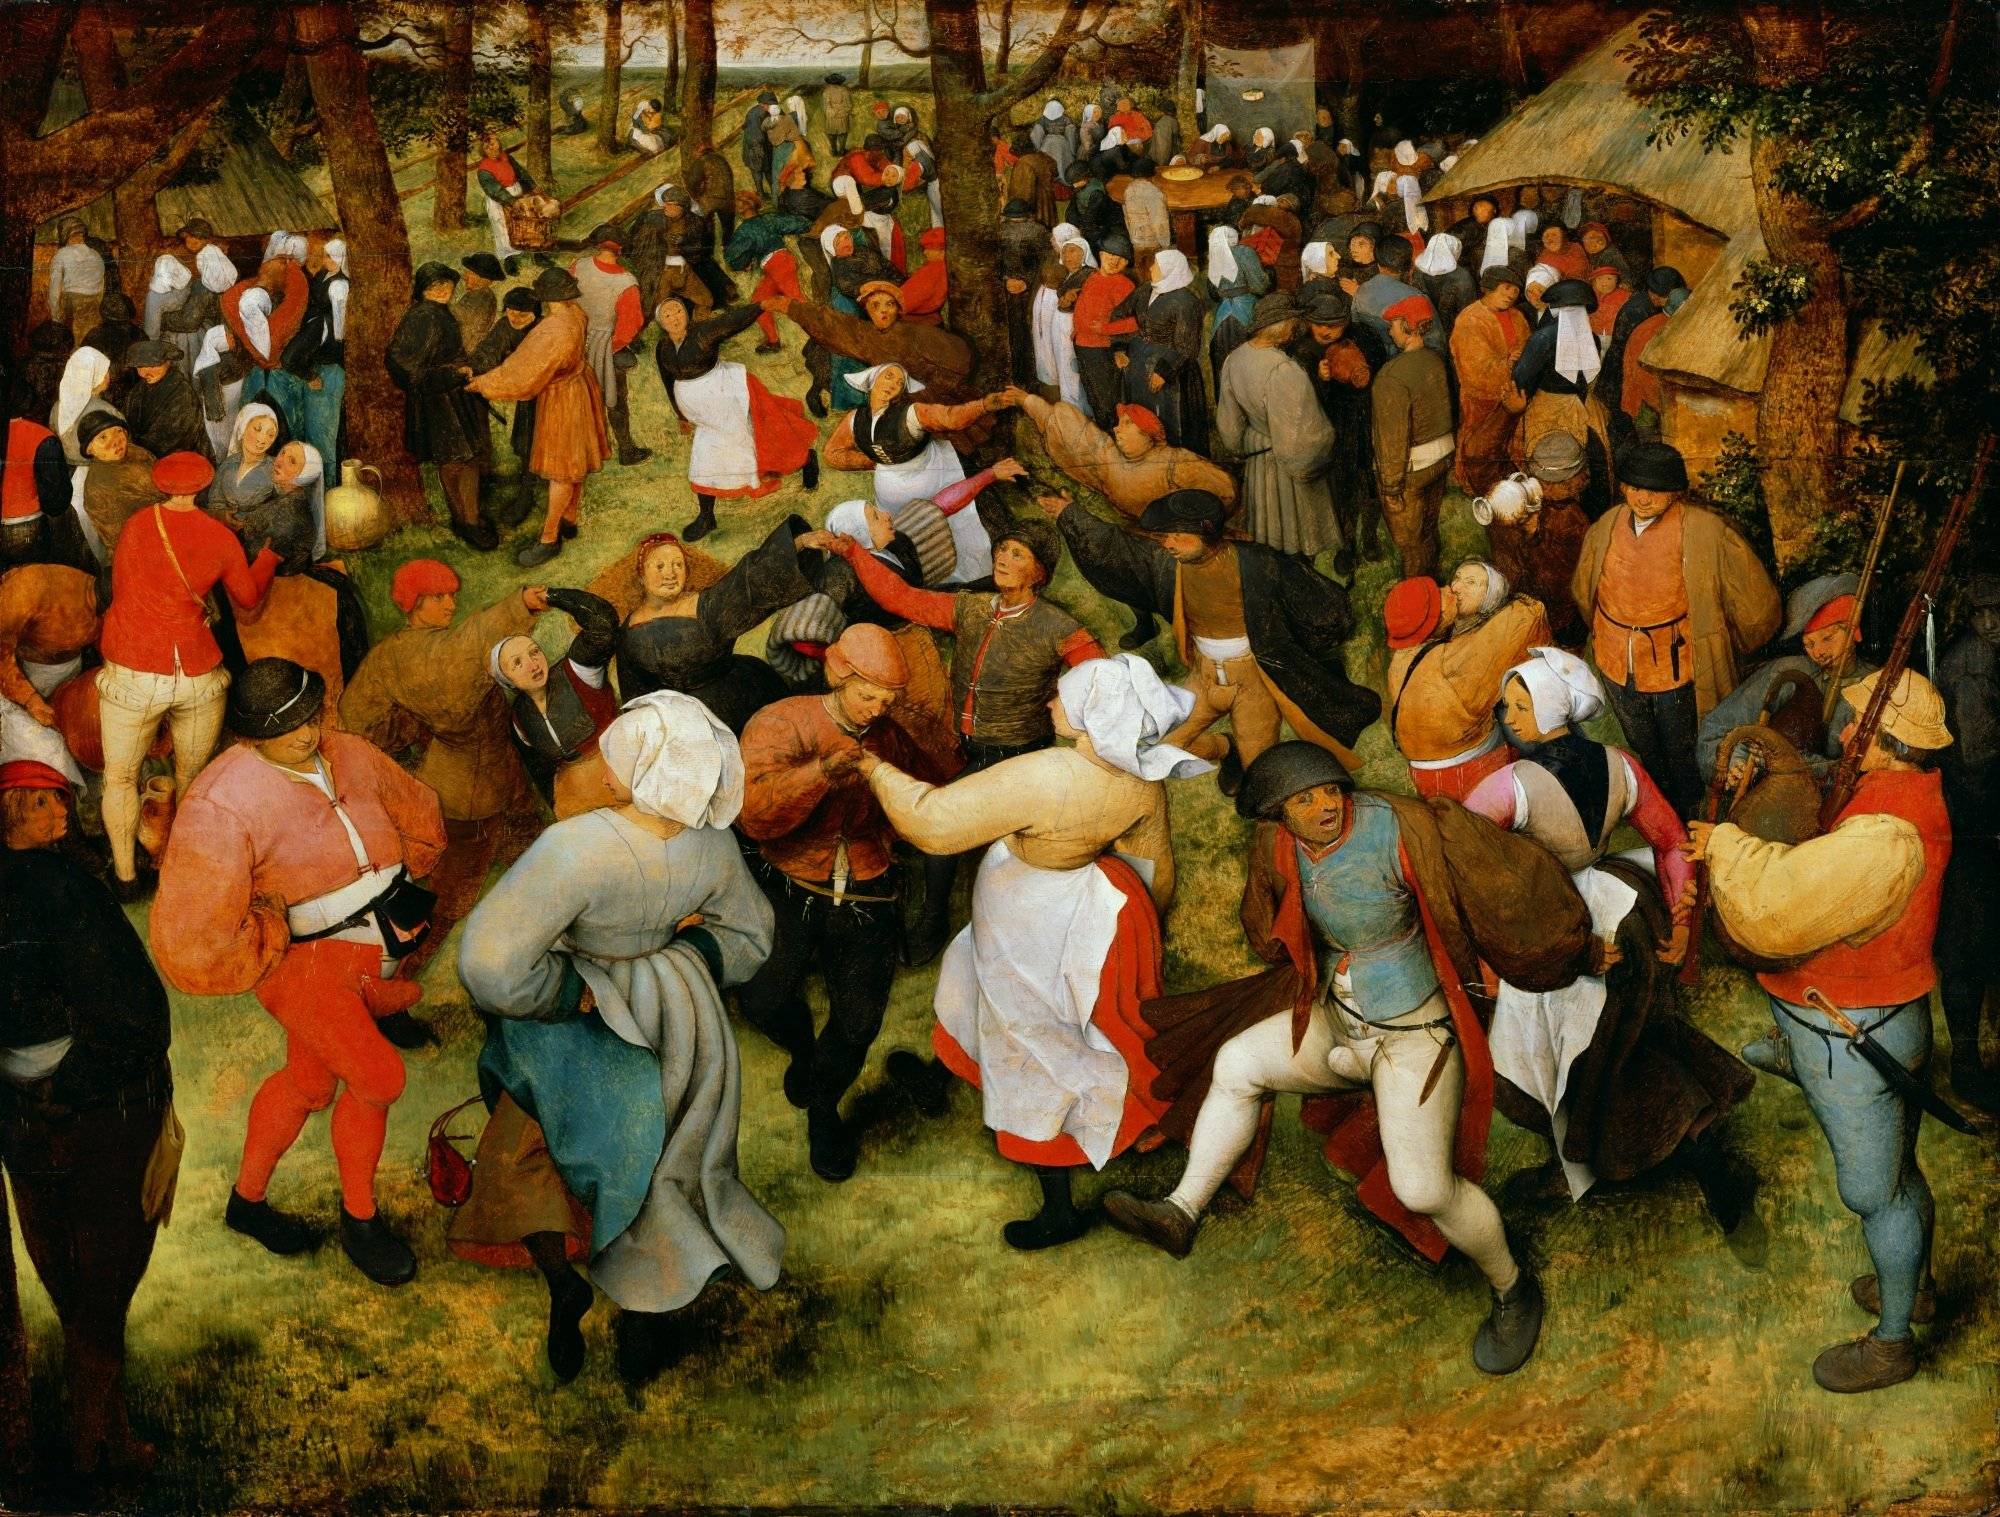 DTR114681 The Wedding Dance, c.1566 (oil on panel) by Bruegel, Pieter the Elder (c.1525-69); 119.3x157.4 cm; Detroit Institute of Arts, USA; City of Detroit Purchase; PERMISSION REQUIRED FOR NON EDITORIAL USAGE; Flemish,  out of copyright

PLEASE NOTE: The Bridgeman Art Library works with the owner of this image to clear permission. If you wish to reproduce this image, please inform us so we can clear permission for you.